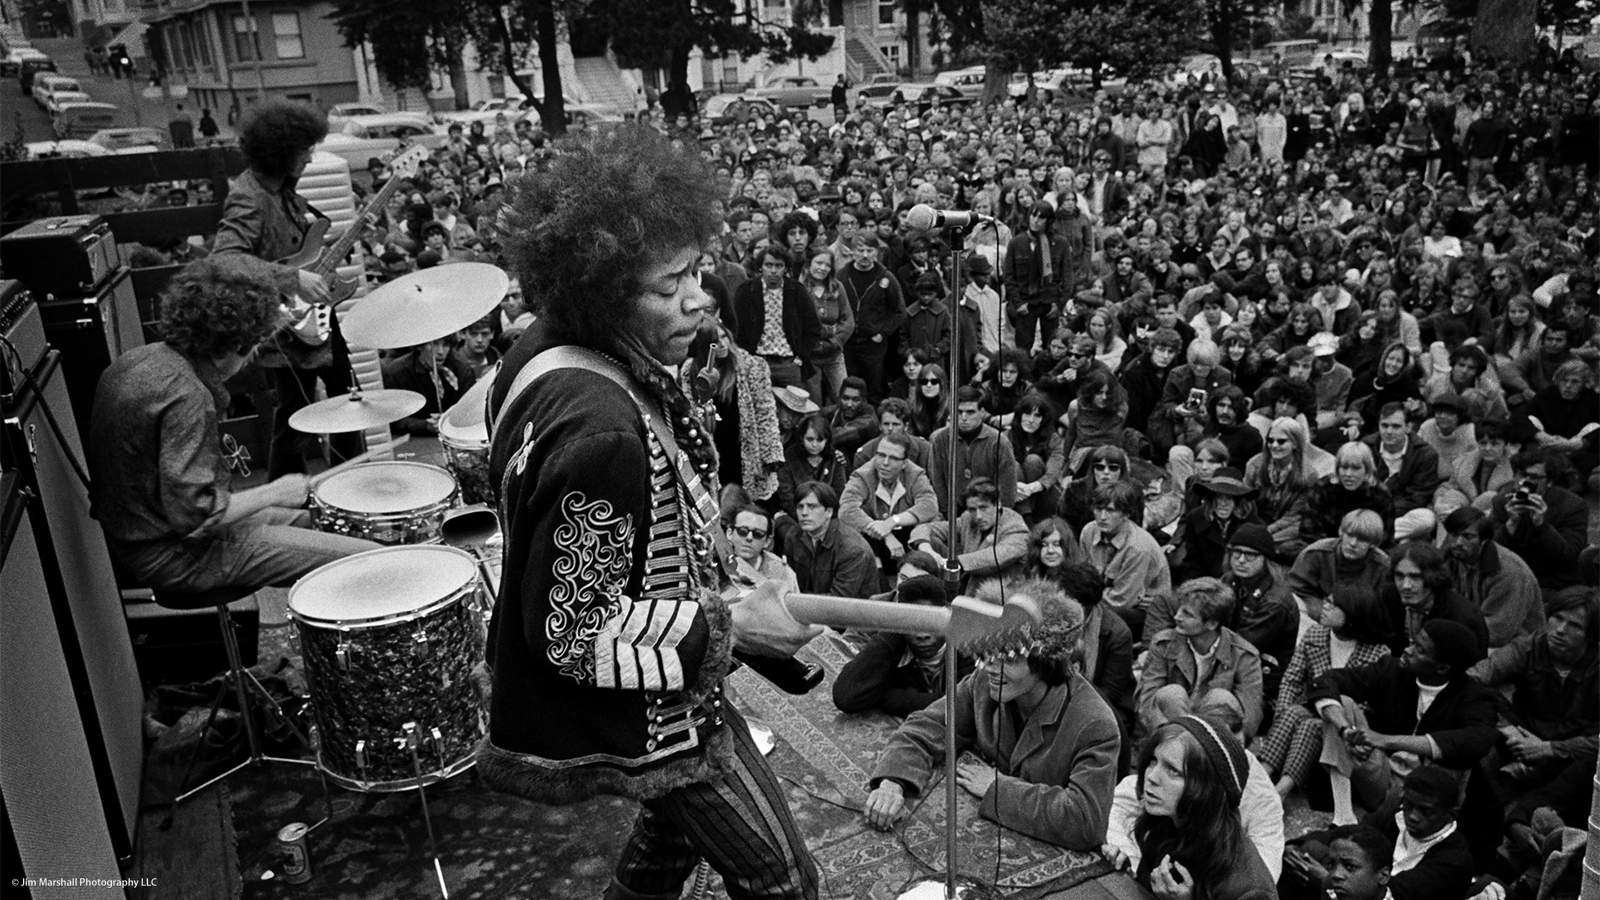 Jimi Hendrix, free concert in the Panhandle, San Francisco, 1967